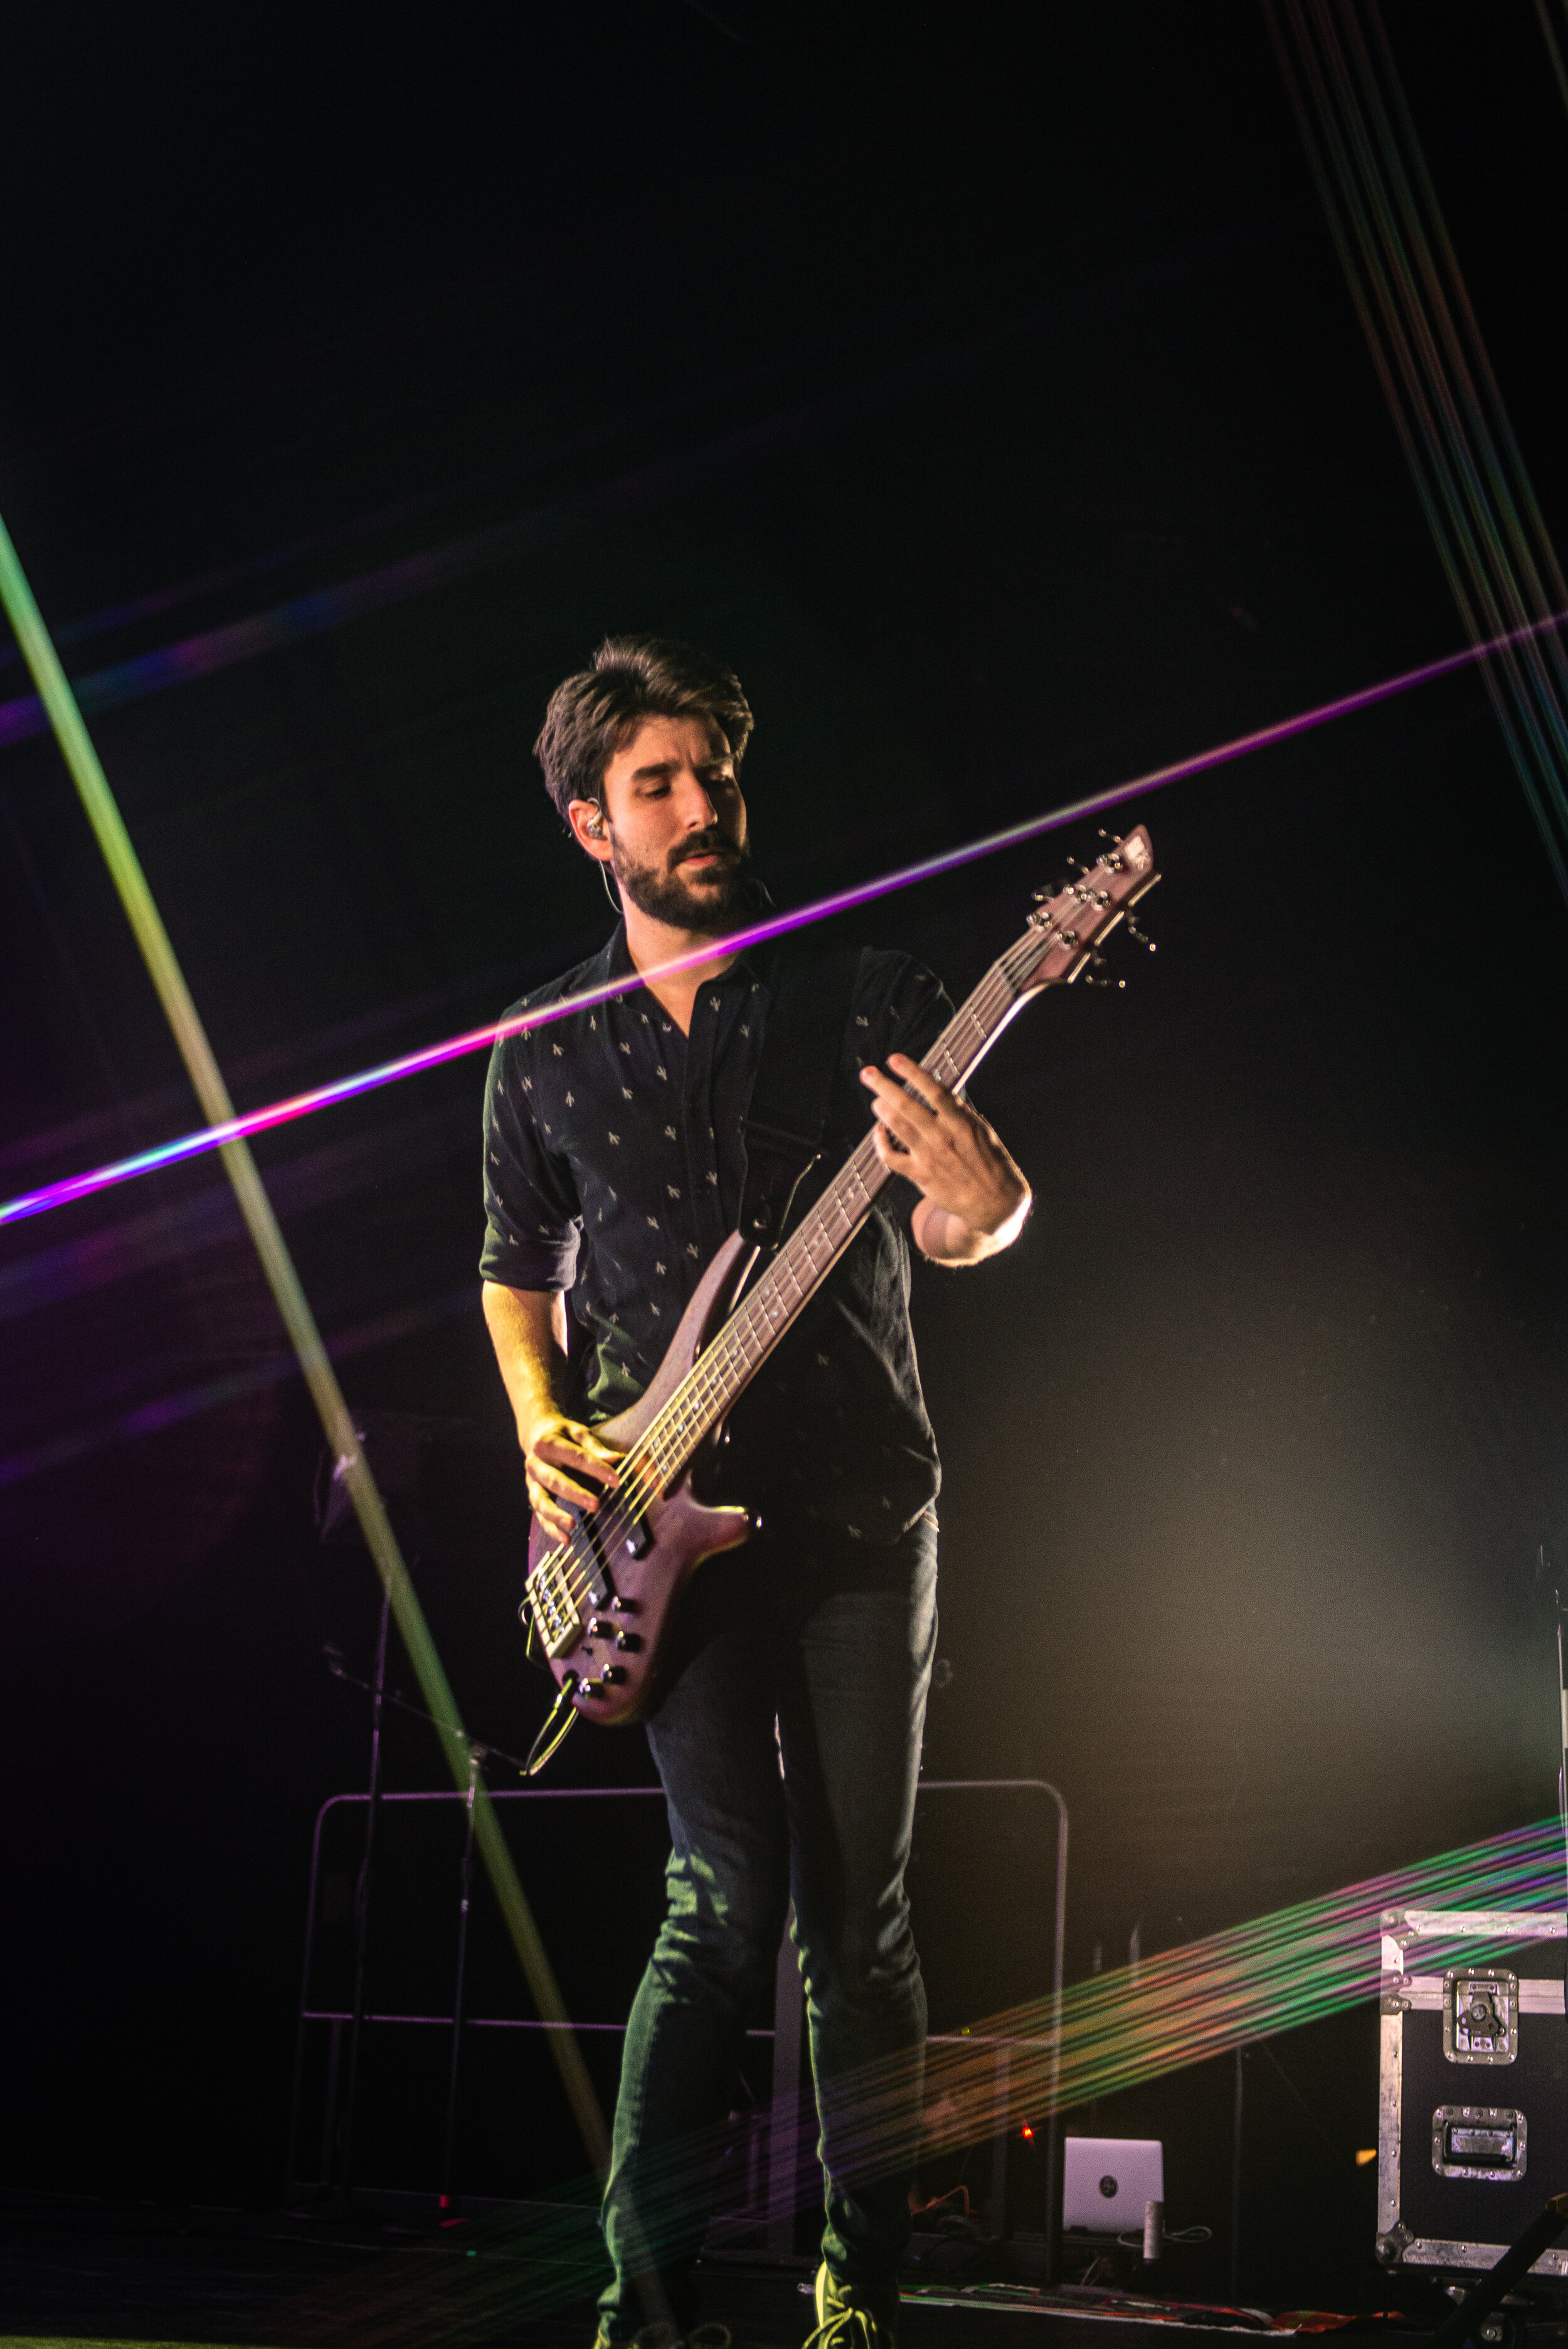  AJR plays at ACL Live on Oct 30 at the Moody Theater. 